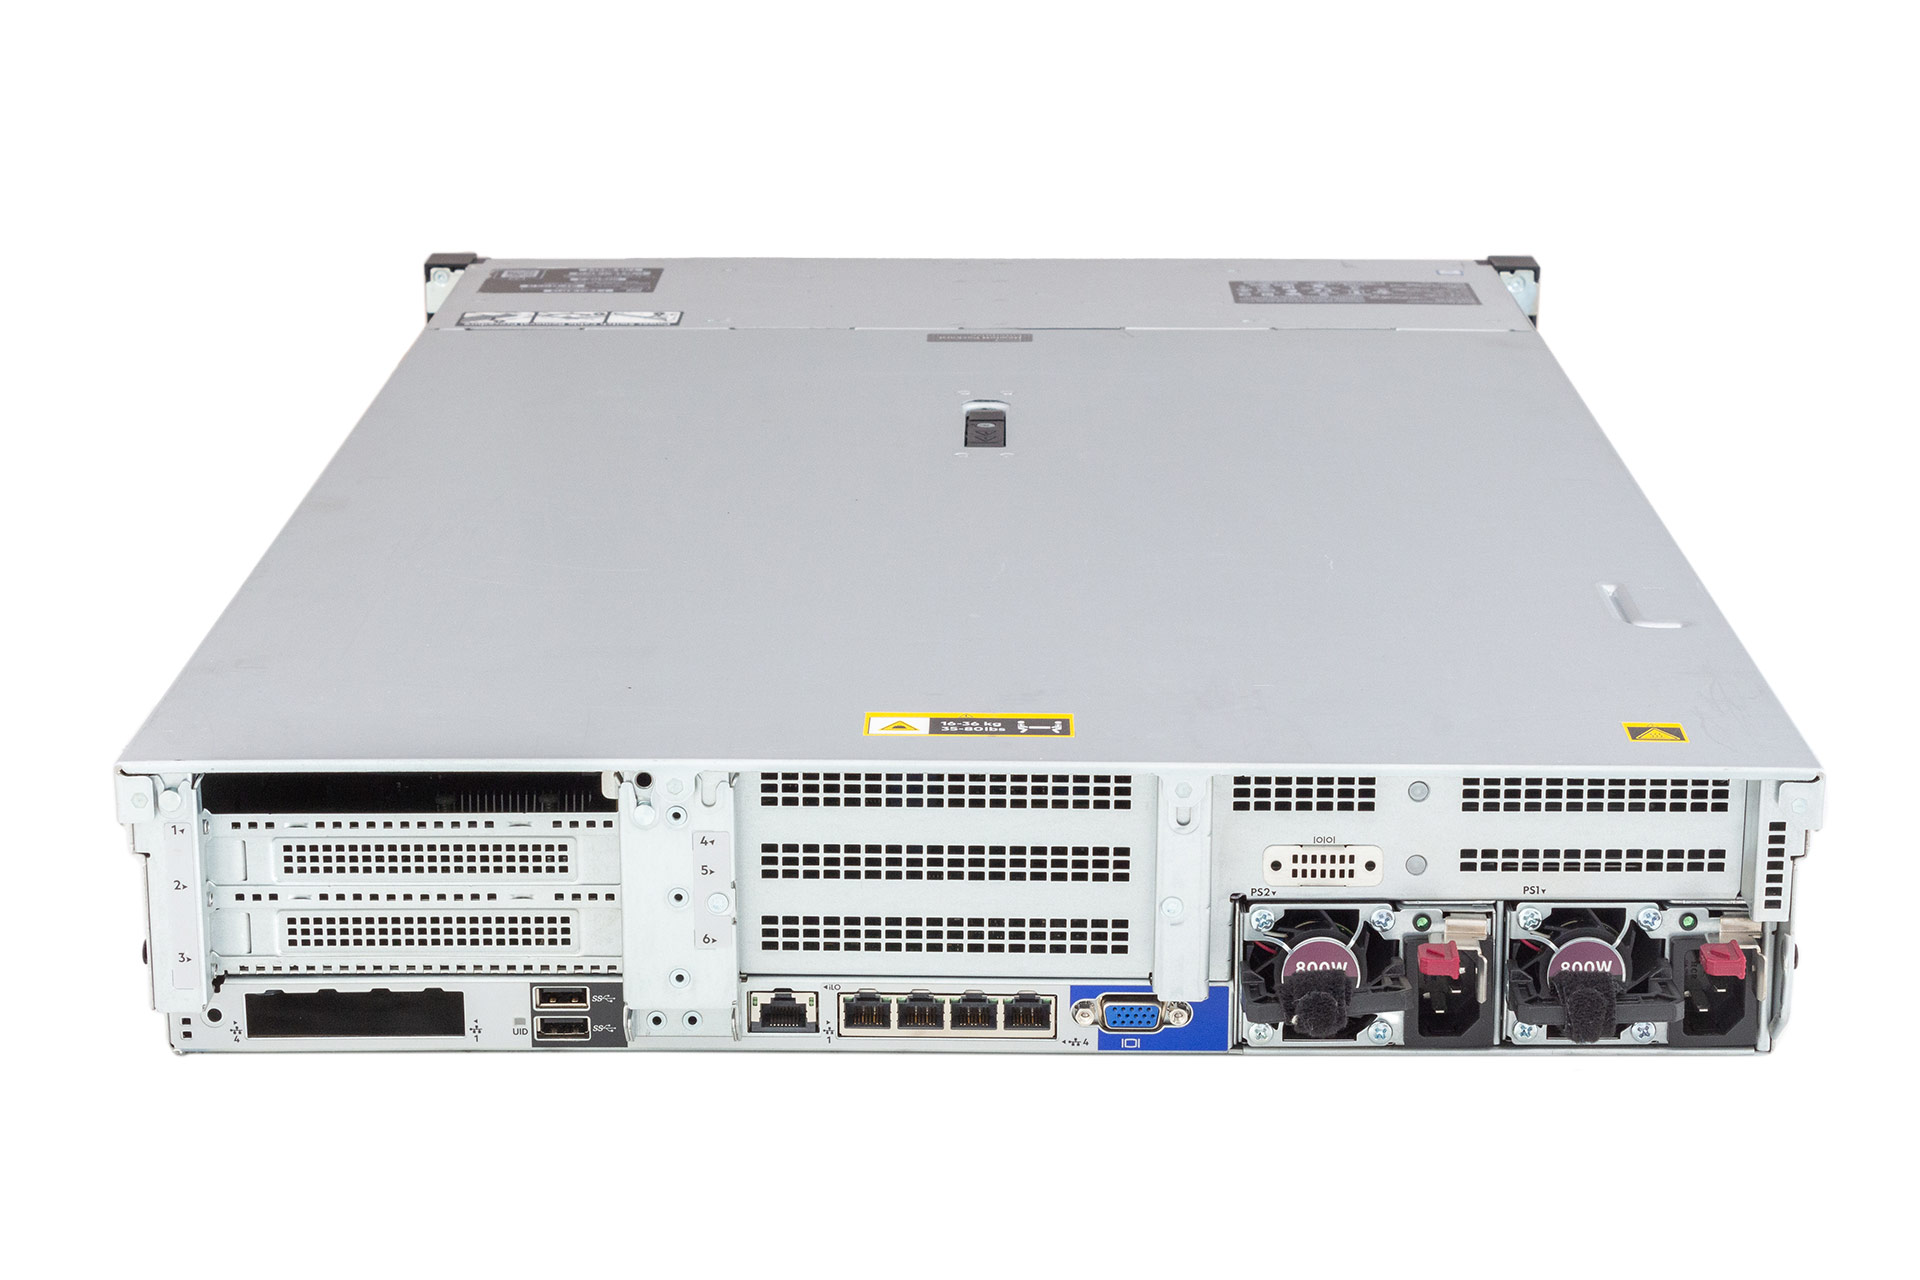 HPE DL380 Gen10 Rack-Server, 2x Silver 4110 2.10GHz, 8-Core, noRAM, 12xLFF, P816i-a/4GB, 1x Cage